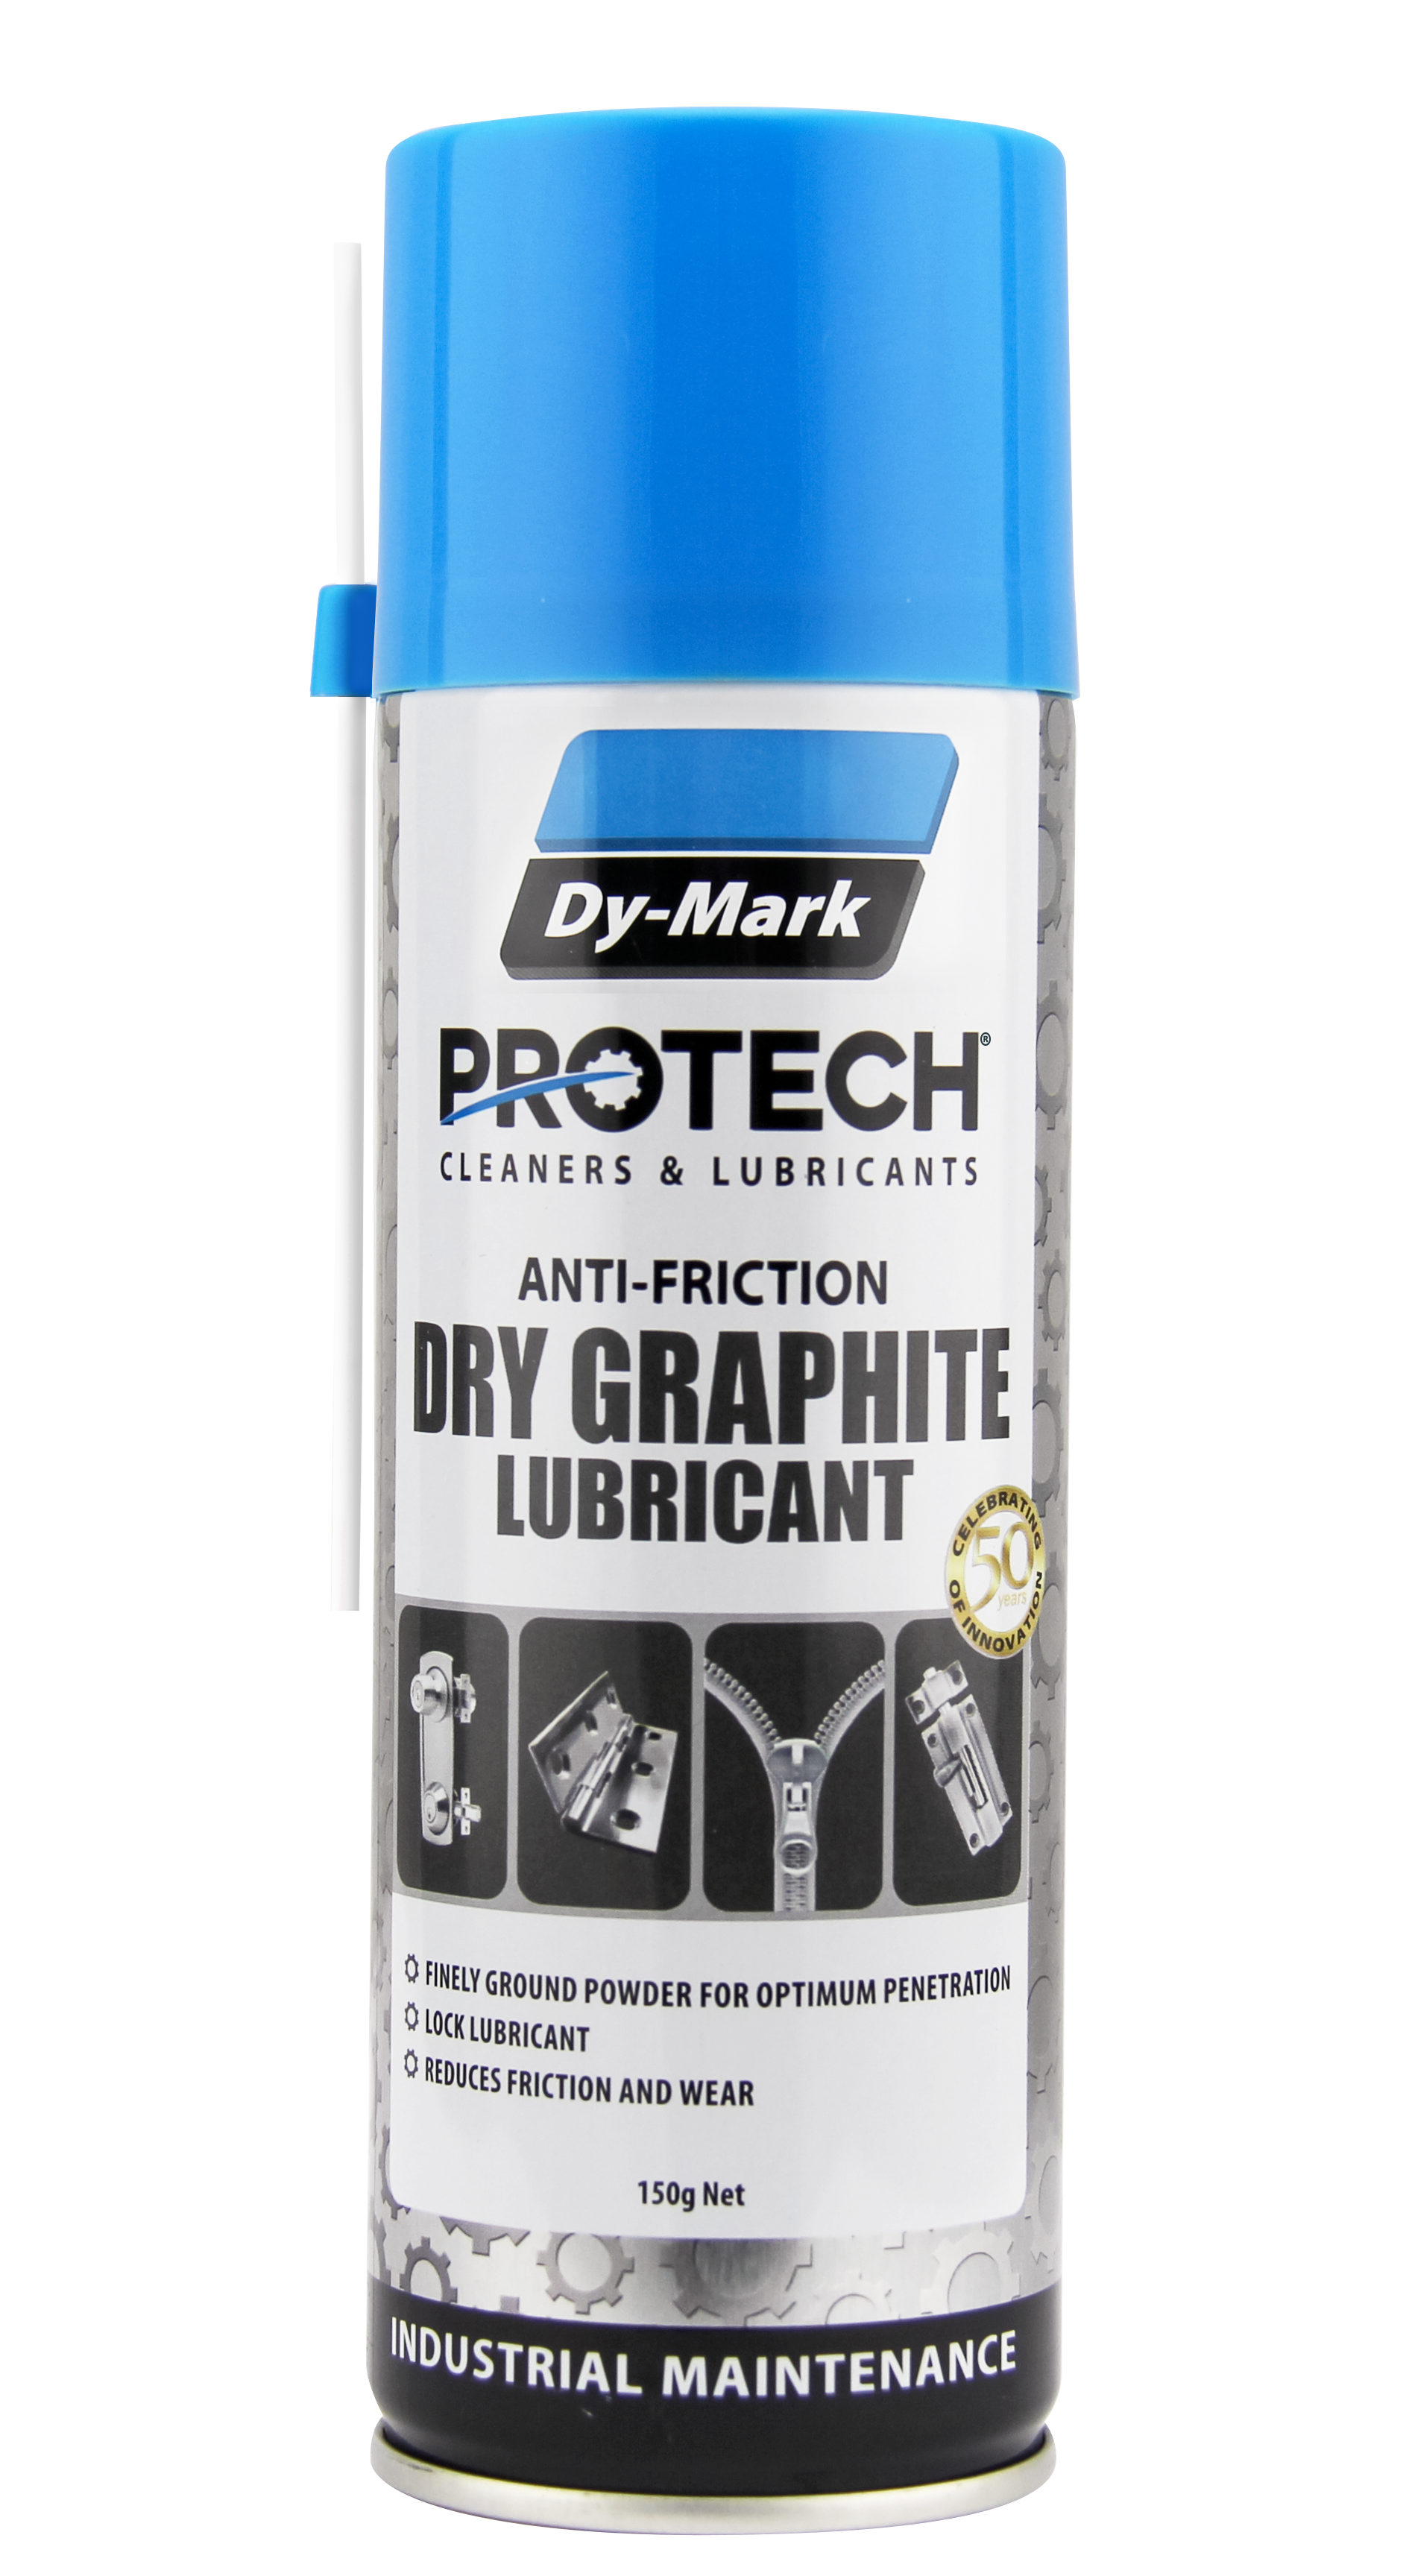 Dy-Mark Protech Dry Graphite Lubricant